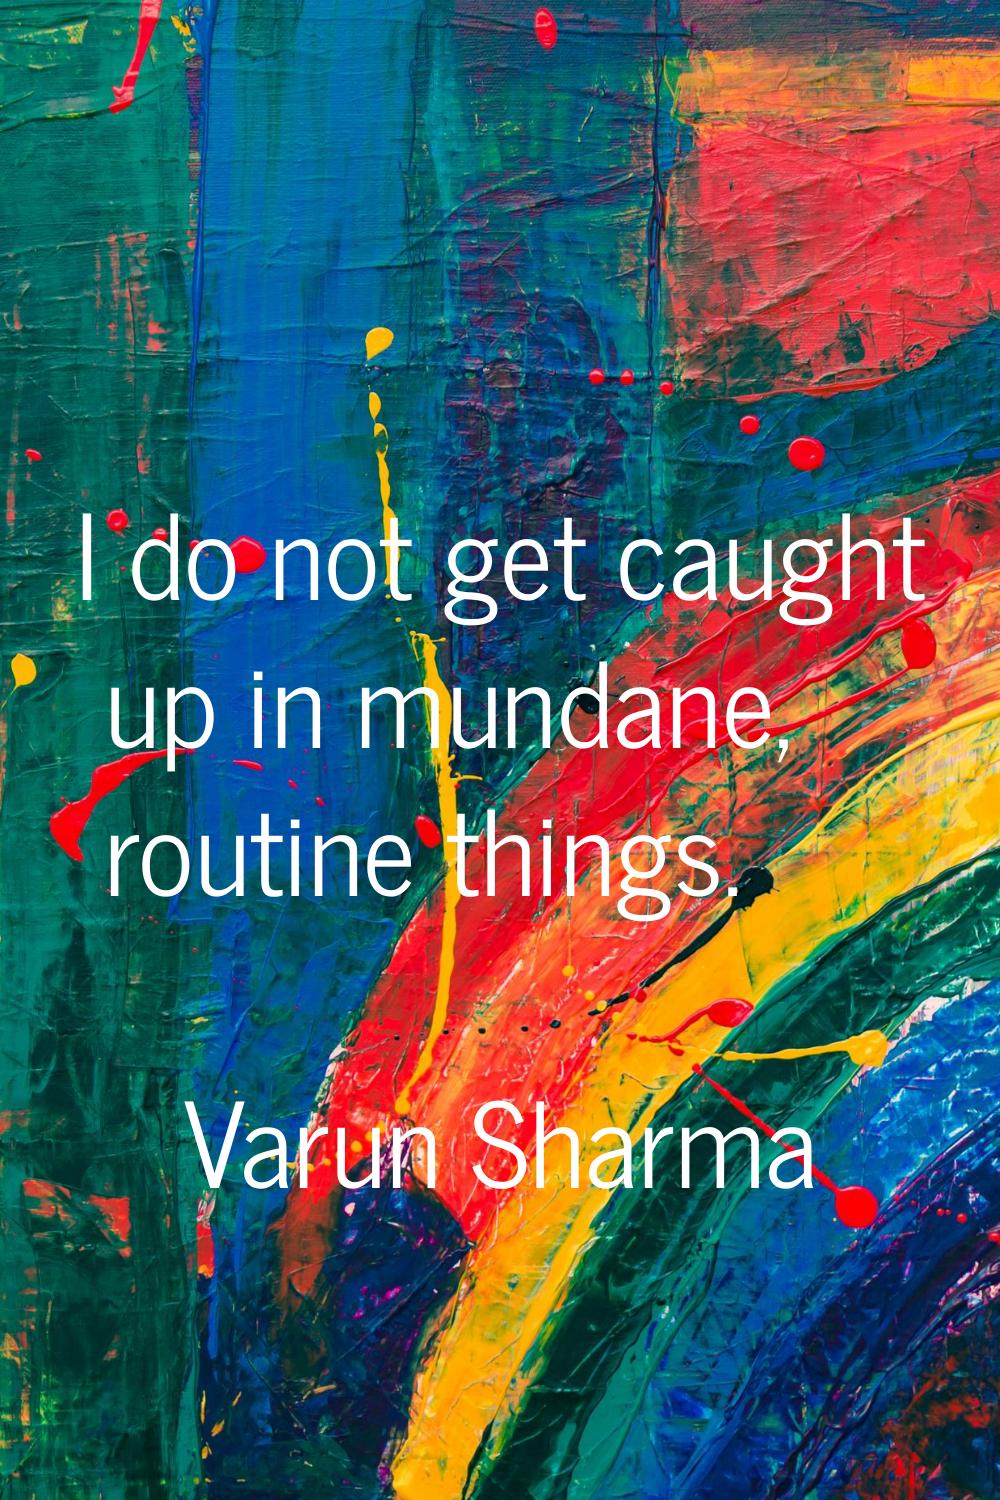 I do not get caught up in mundane, routine things.